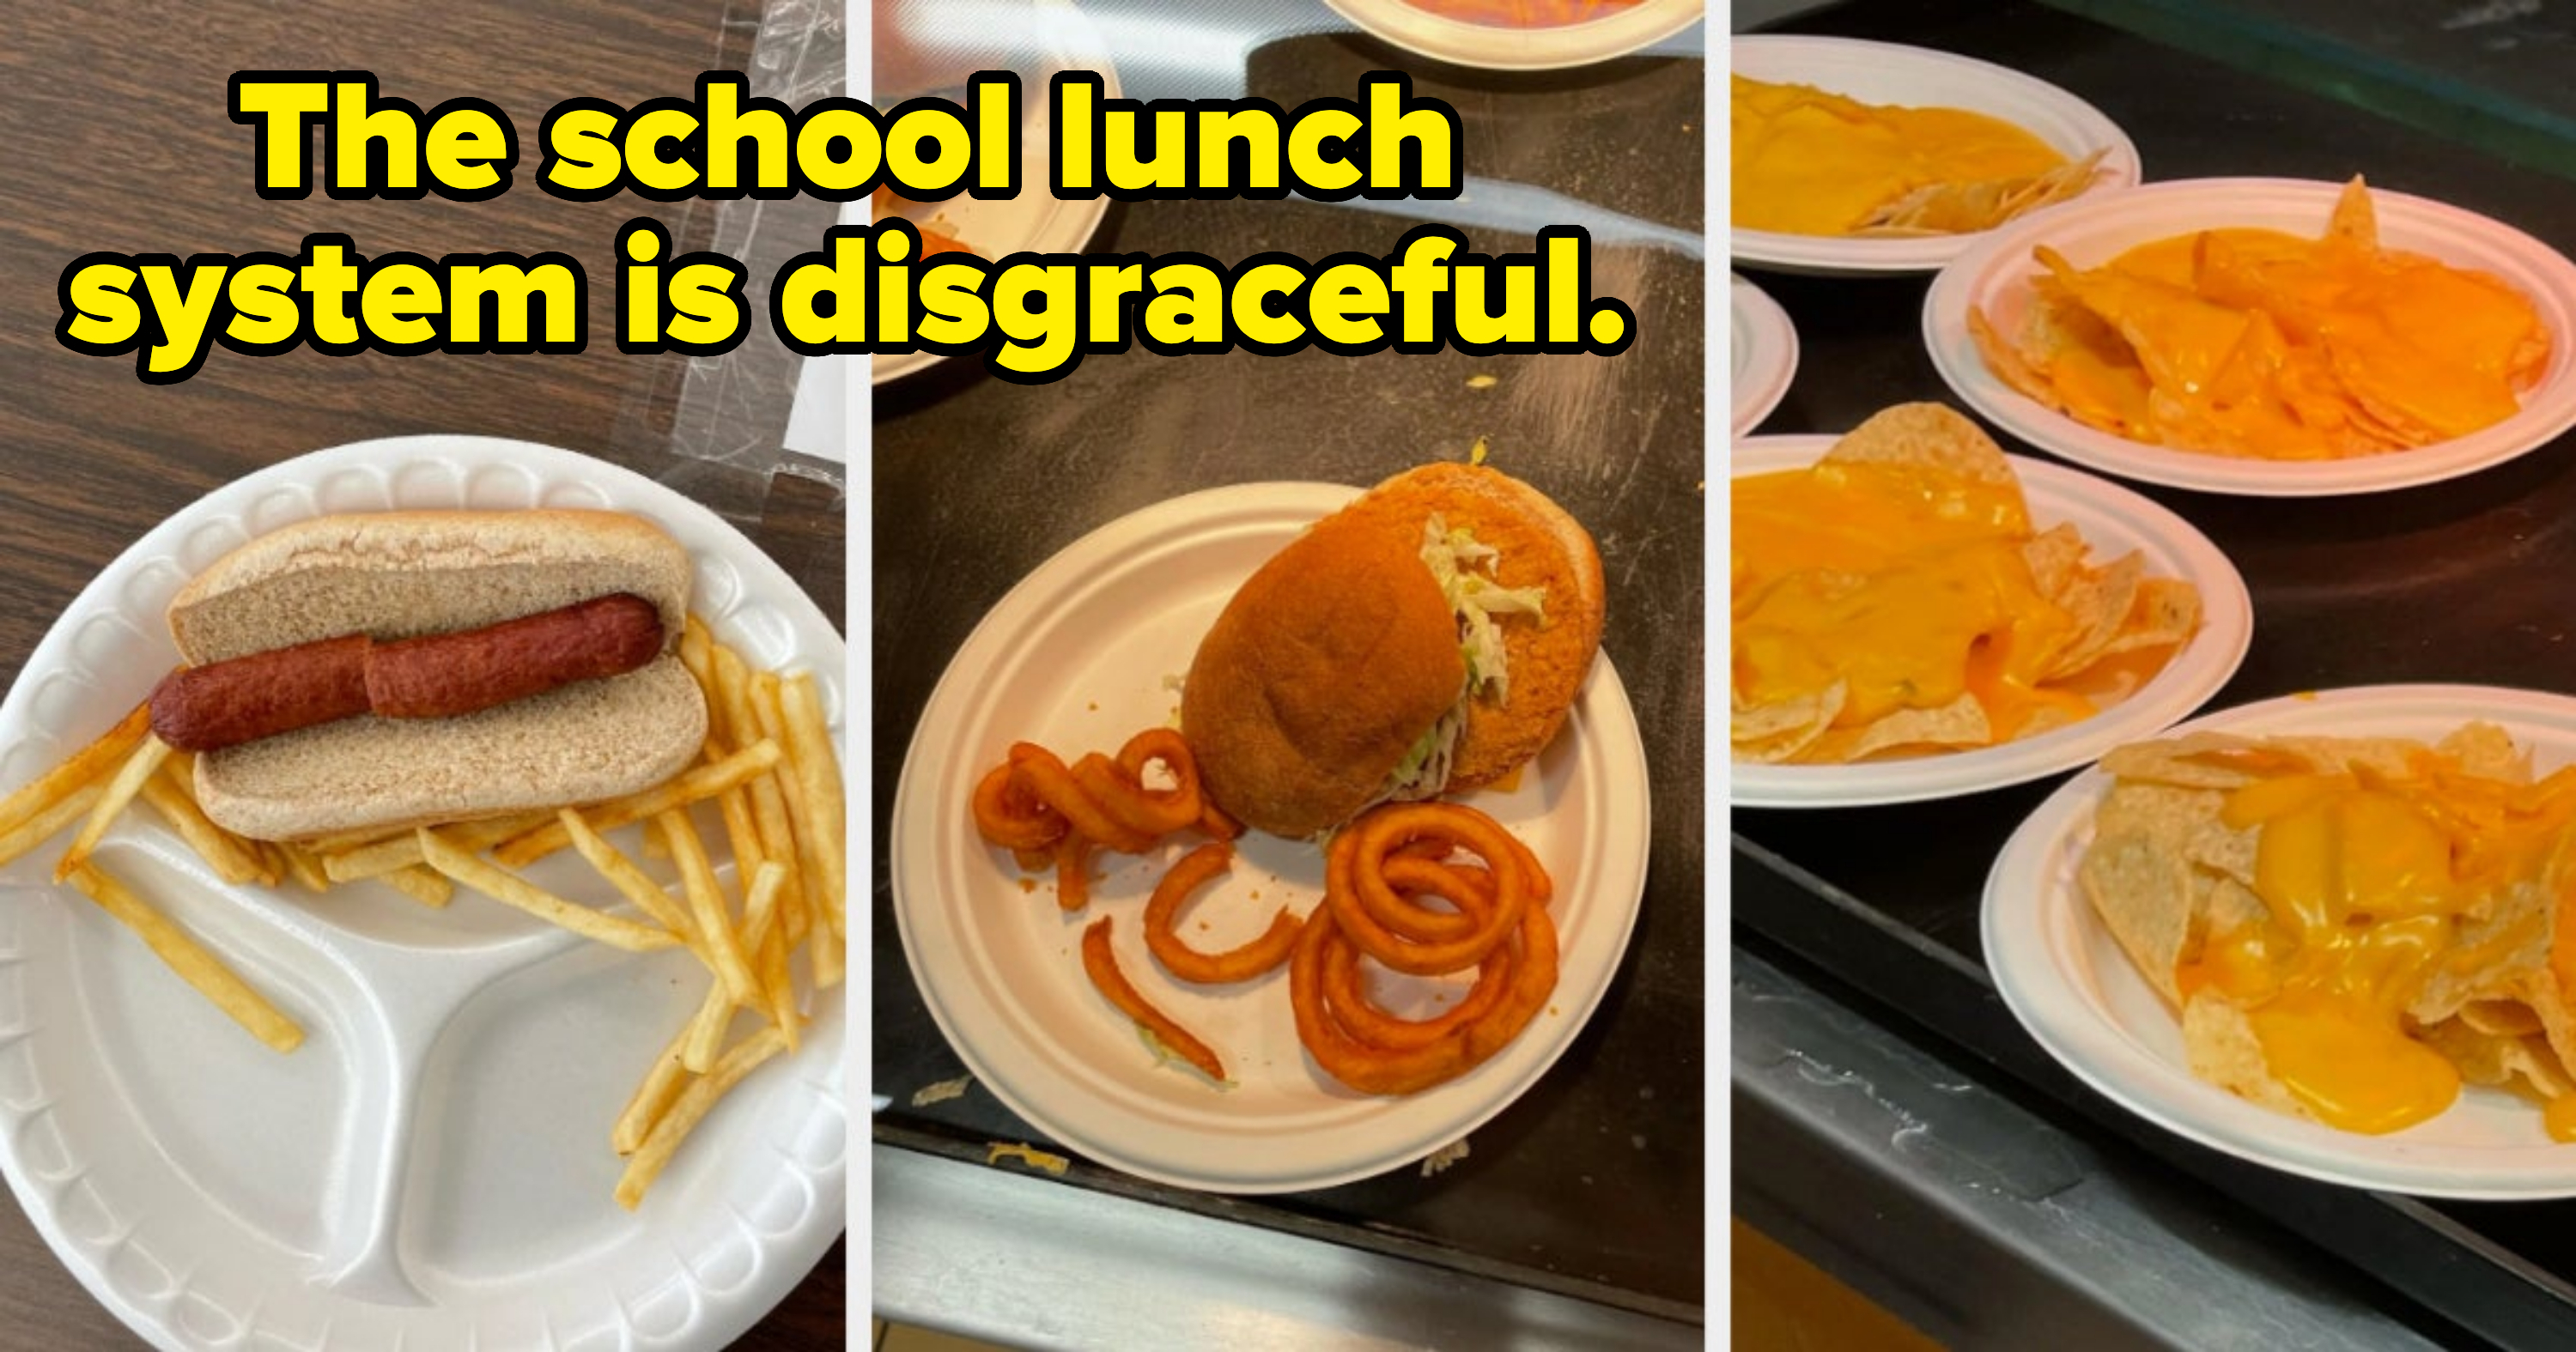 Three images show unappetizing cafeteria food: a hot dog with fries, a sandwich with curly fries, and plates of nachos with cheese